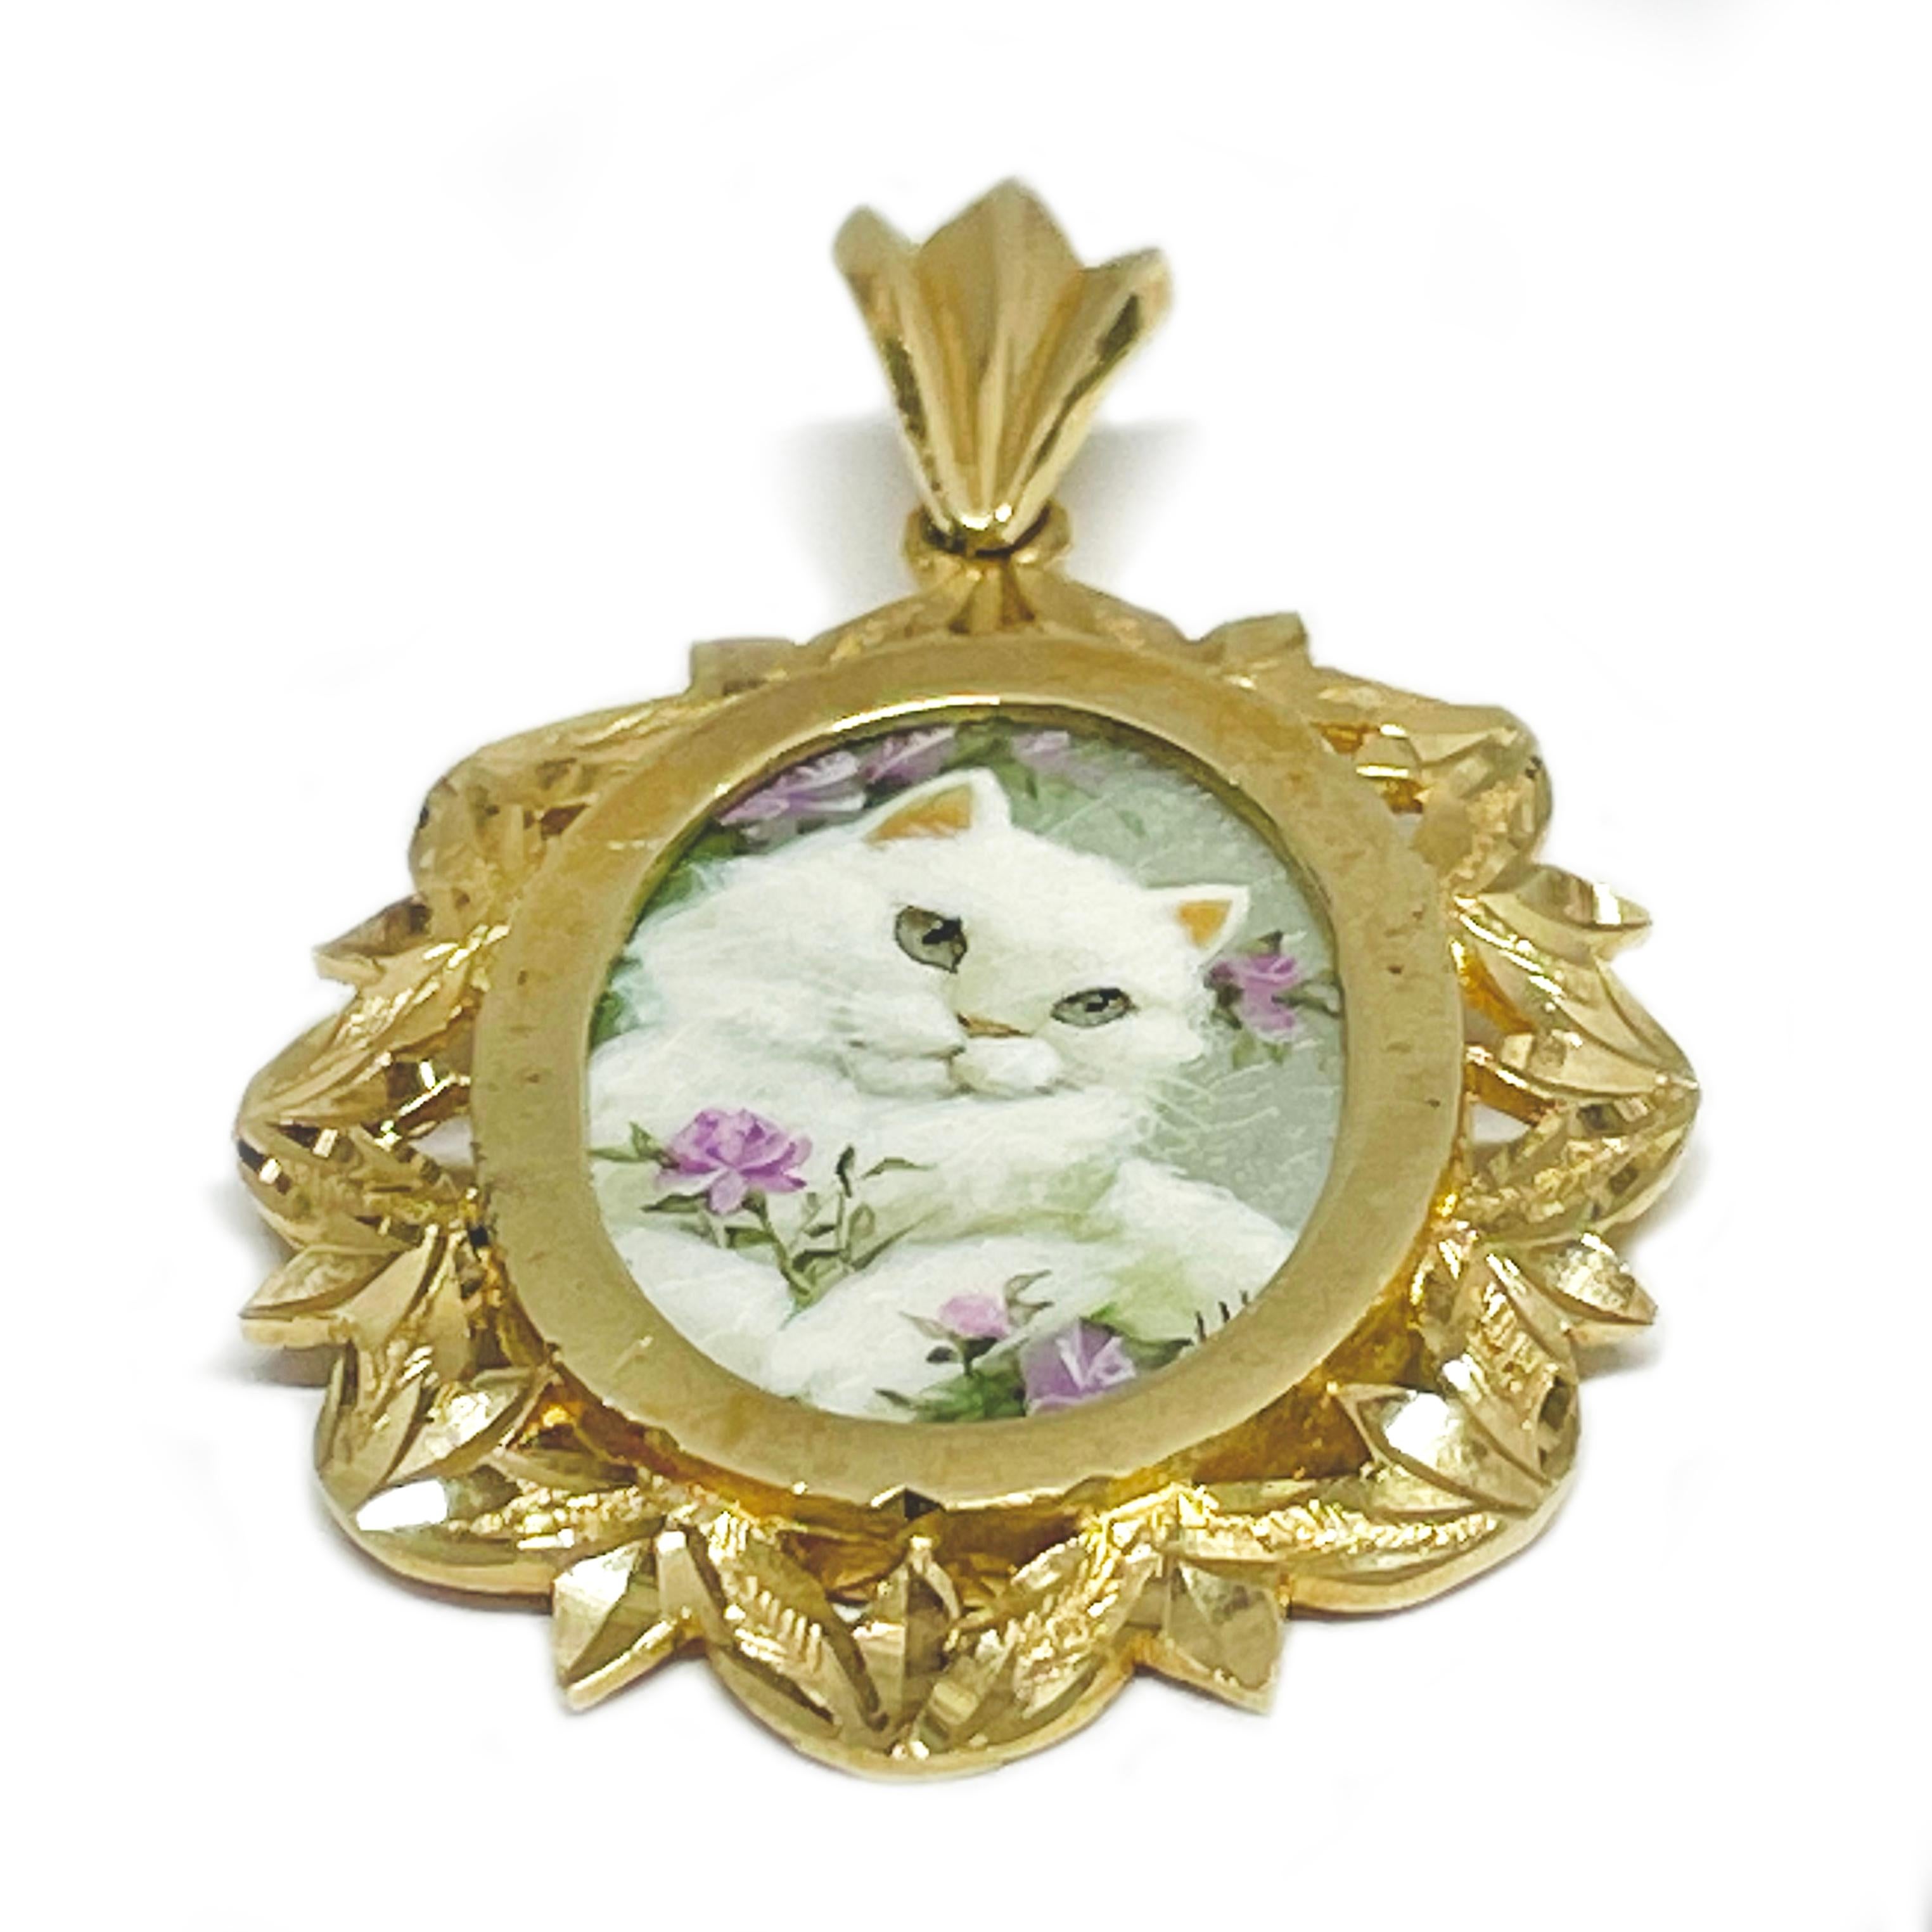 14 Karat Yellow Gold White Cat Hand Painted on a Mother of Pearl Pendant. The painting features a white cat with lavender flowers. The miniature painting is set in a 14 karat gold ornate oval frame with diamond-cut details. The painting is signed by